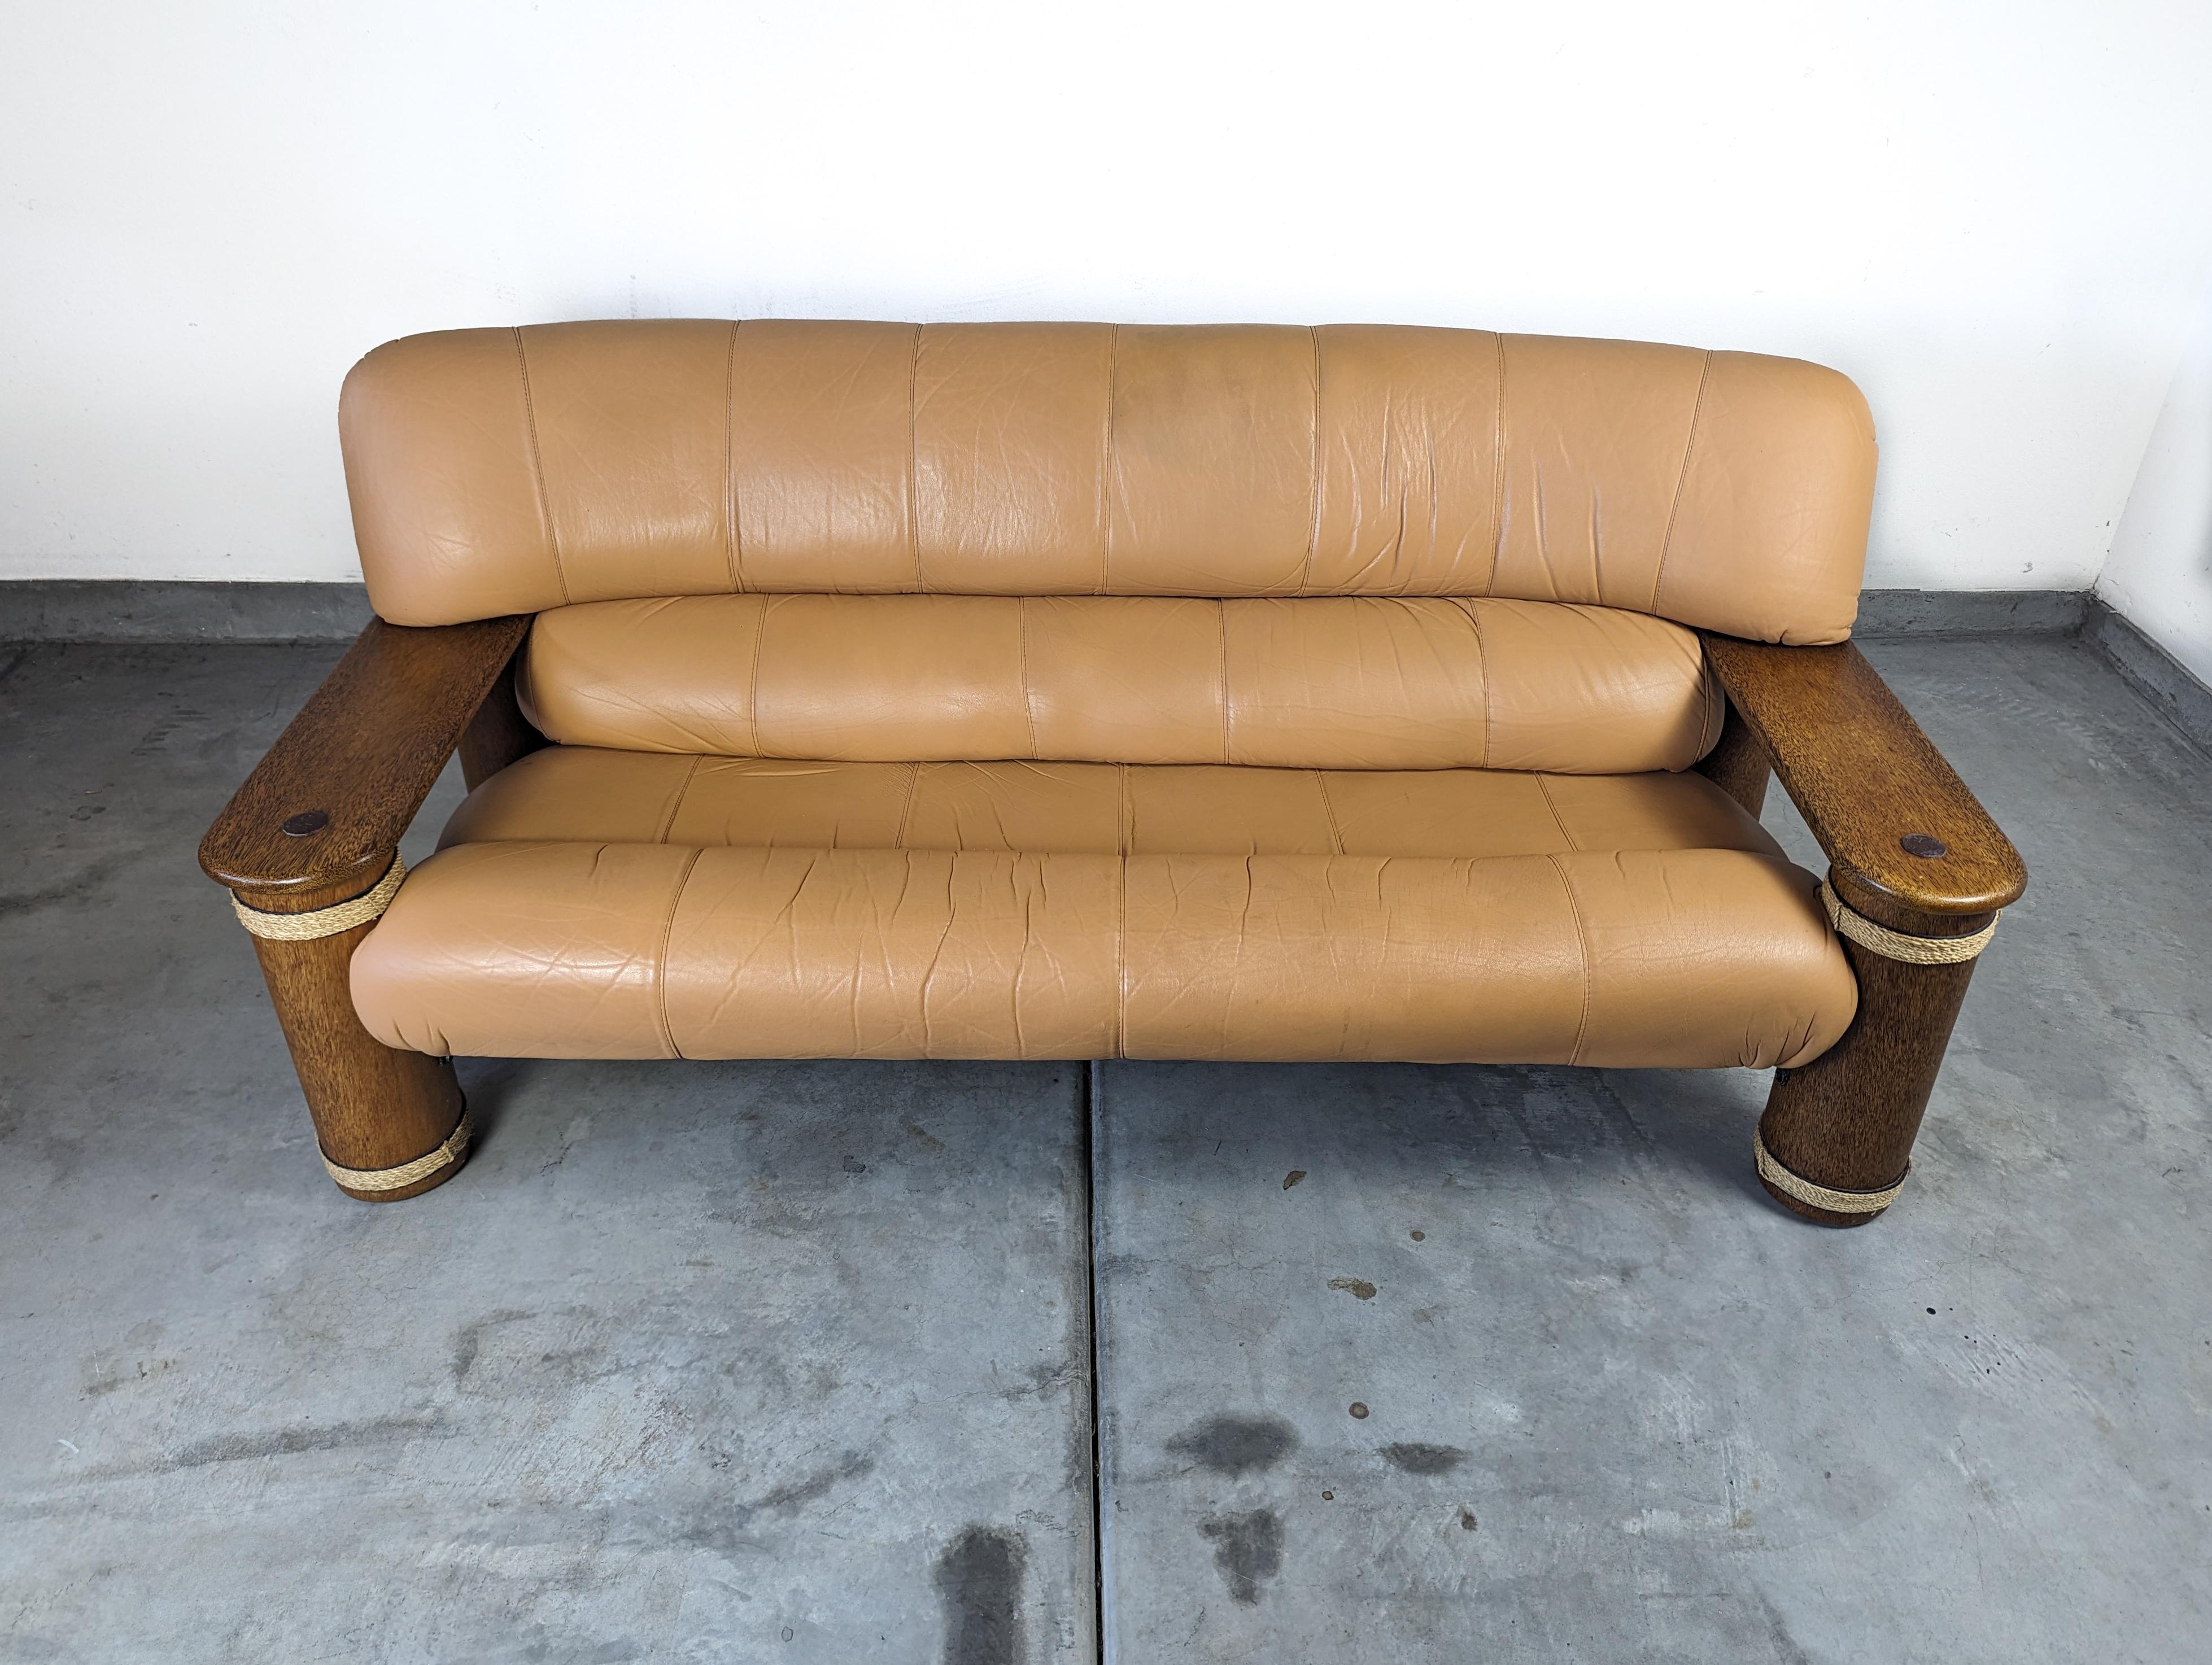 Vintage Leather and Palmwood Three-Seat Sofa by Pacific Green, c1990s For Sale 13